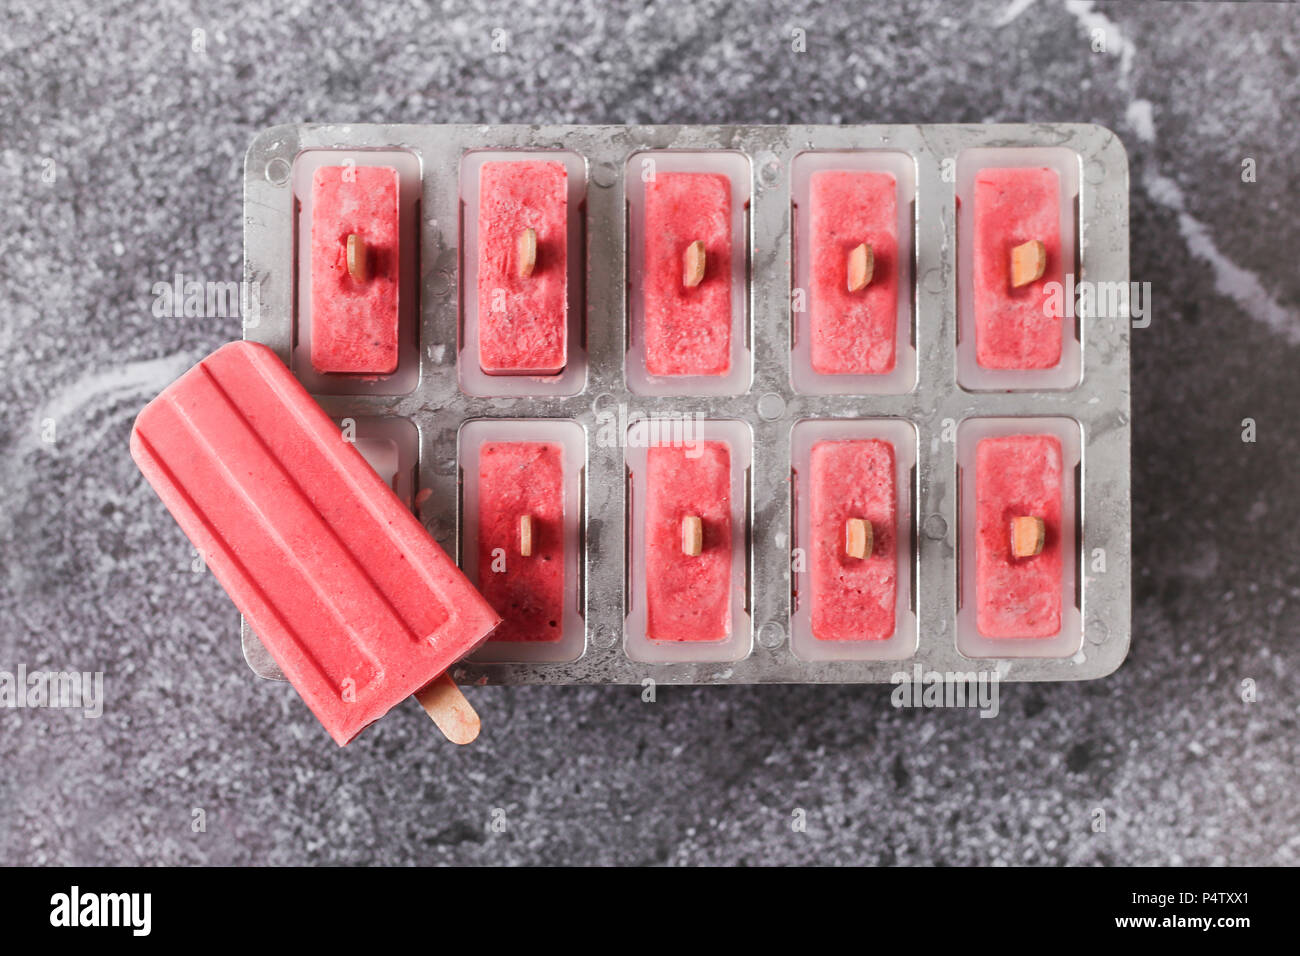 Homemade strawberry ice lollies in tray Stock Photo